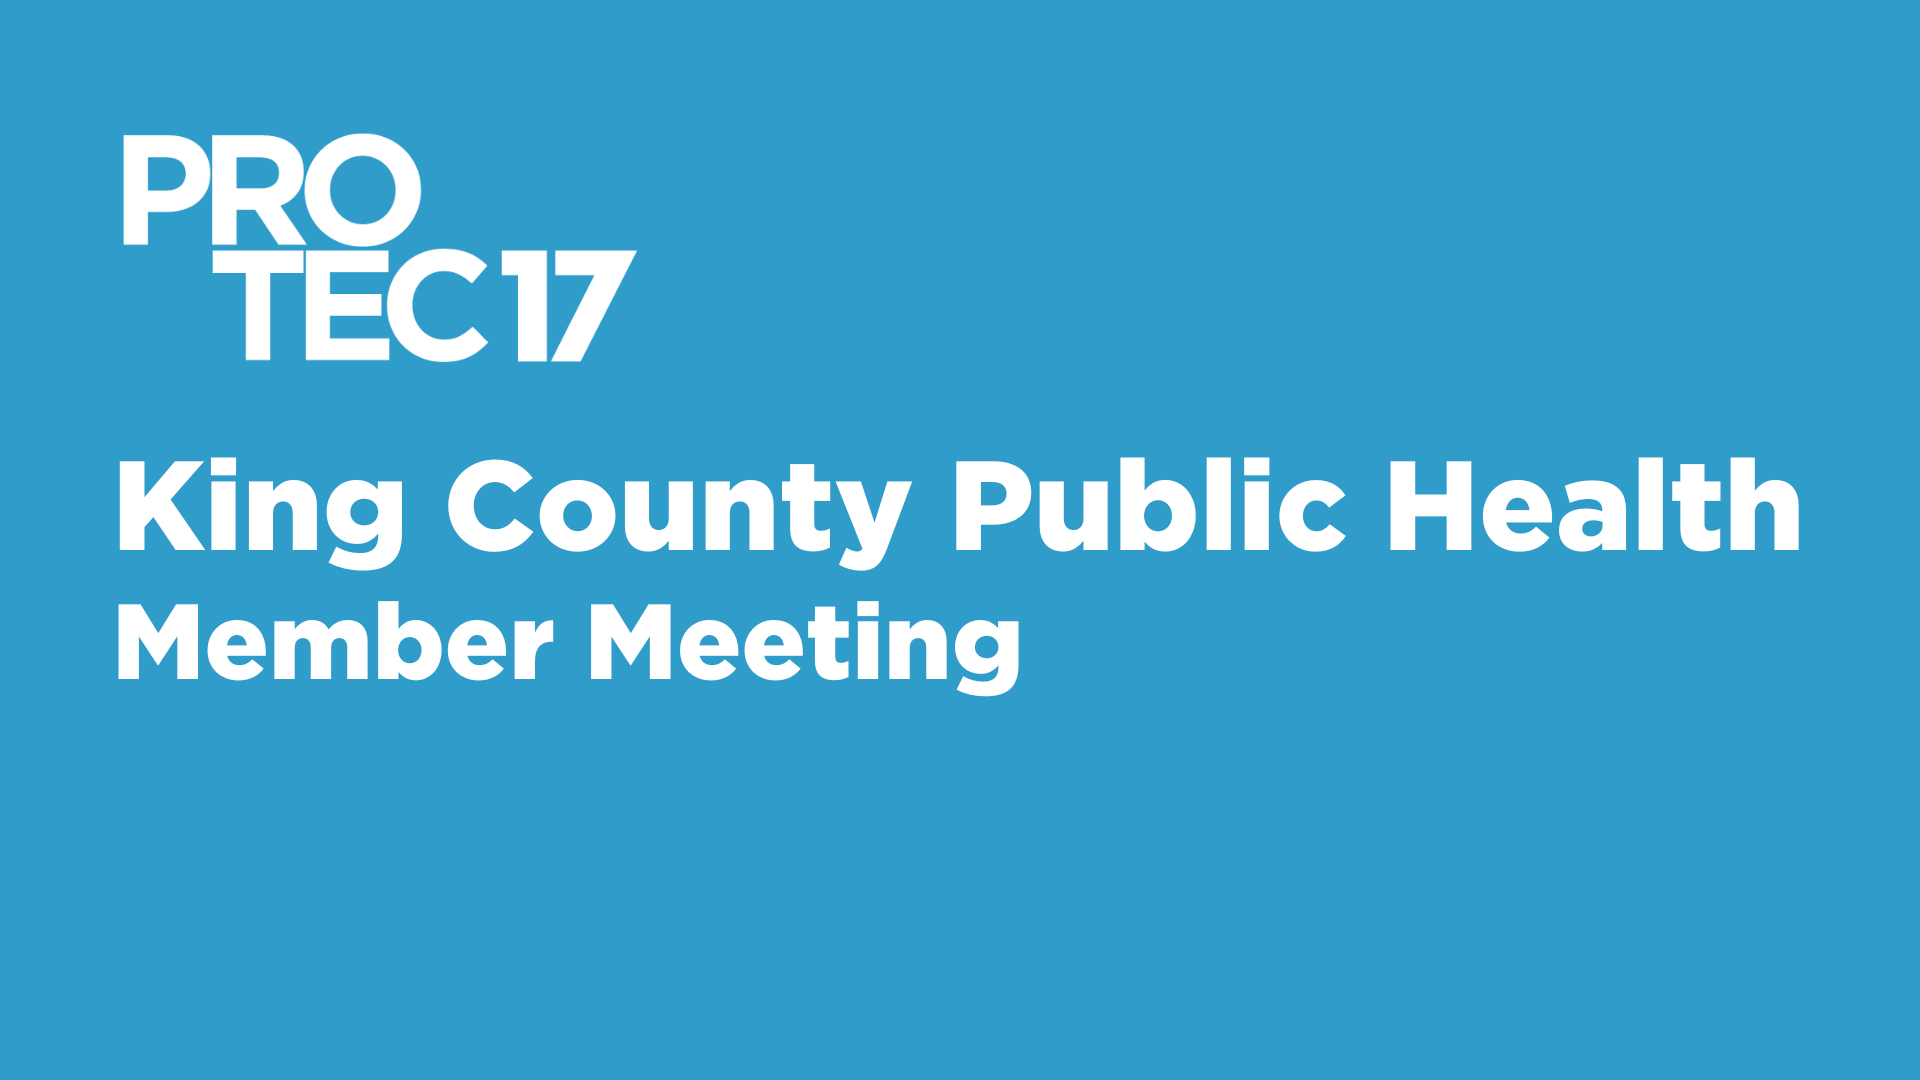 Banner image that shows the PROTEC17 logo and reads, "King County Public Health Member Meeting."